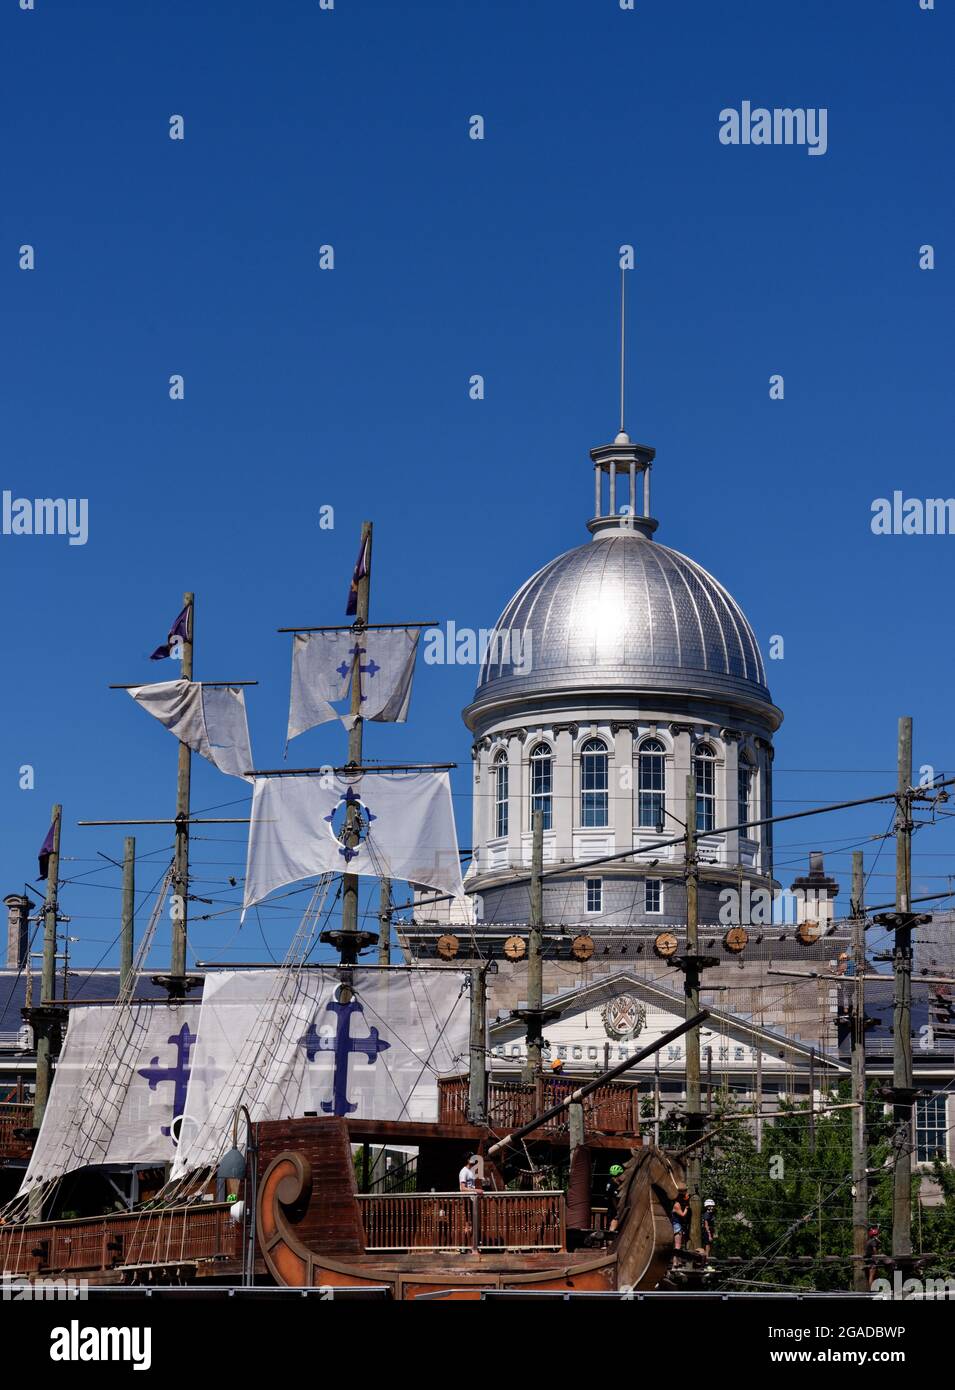 The Montreal Old Port (Le Vieux Port) with the dome of Marché Bonsecours and the Voiles en Voiles pirate ship adventure Stock Photo